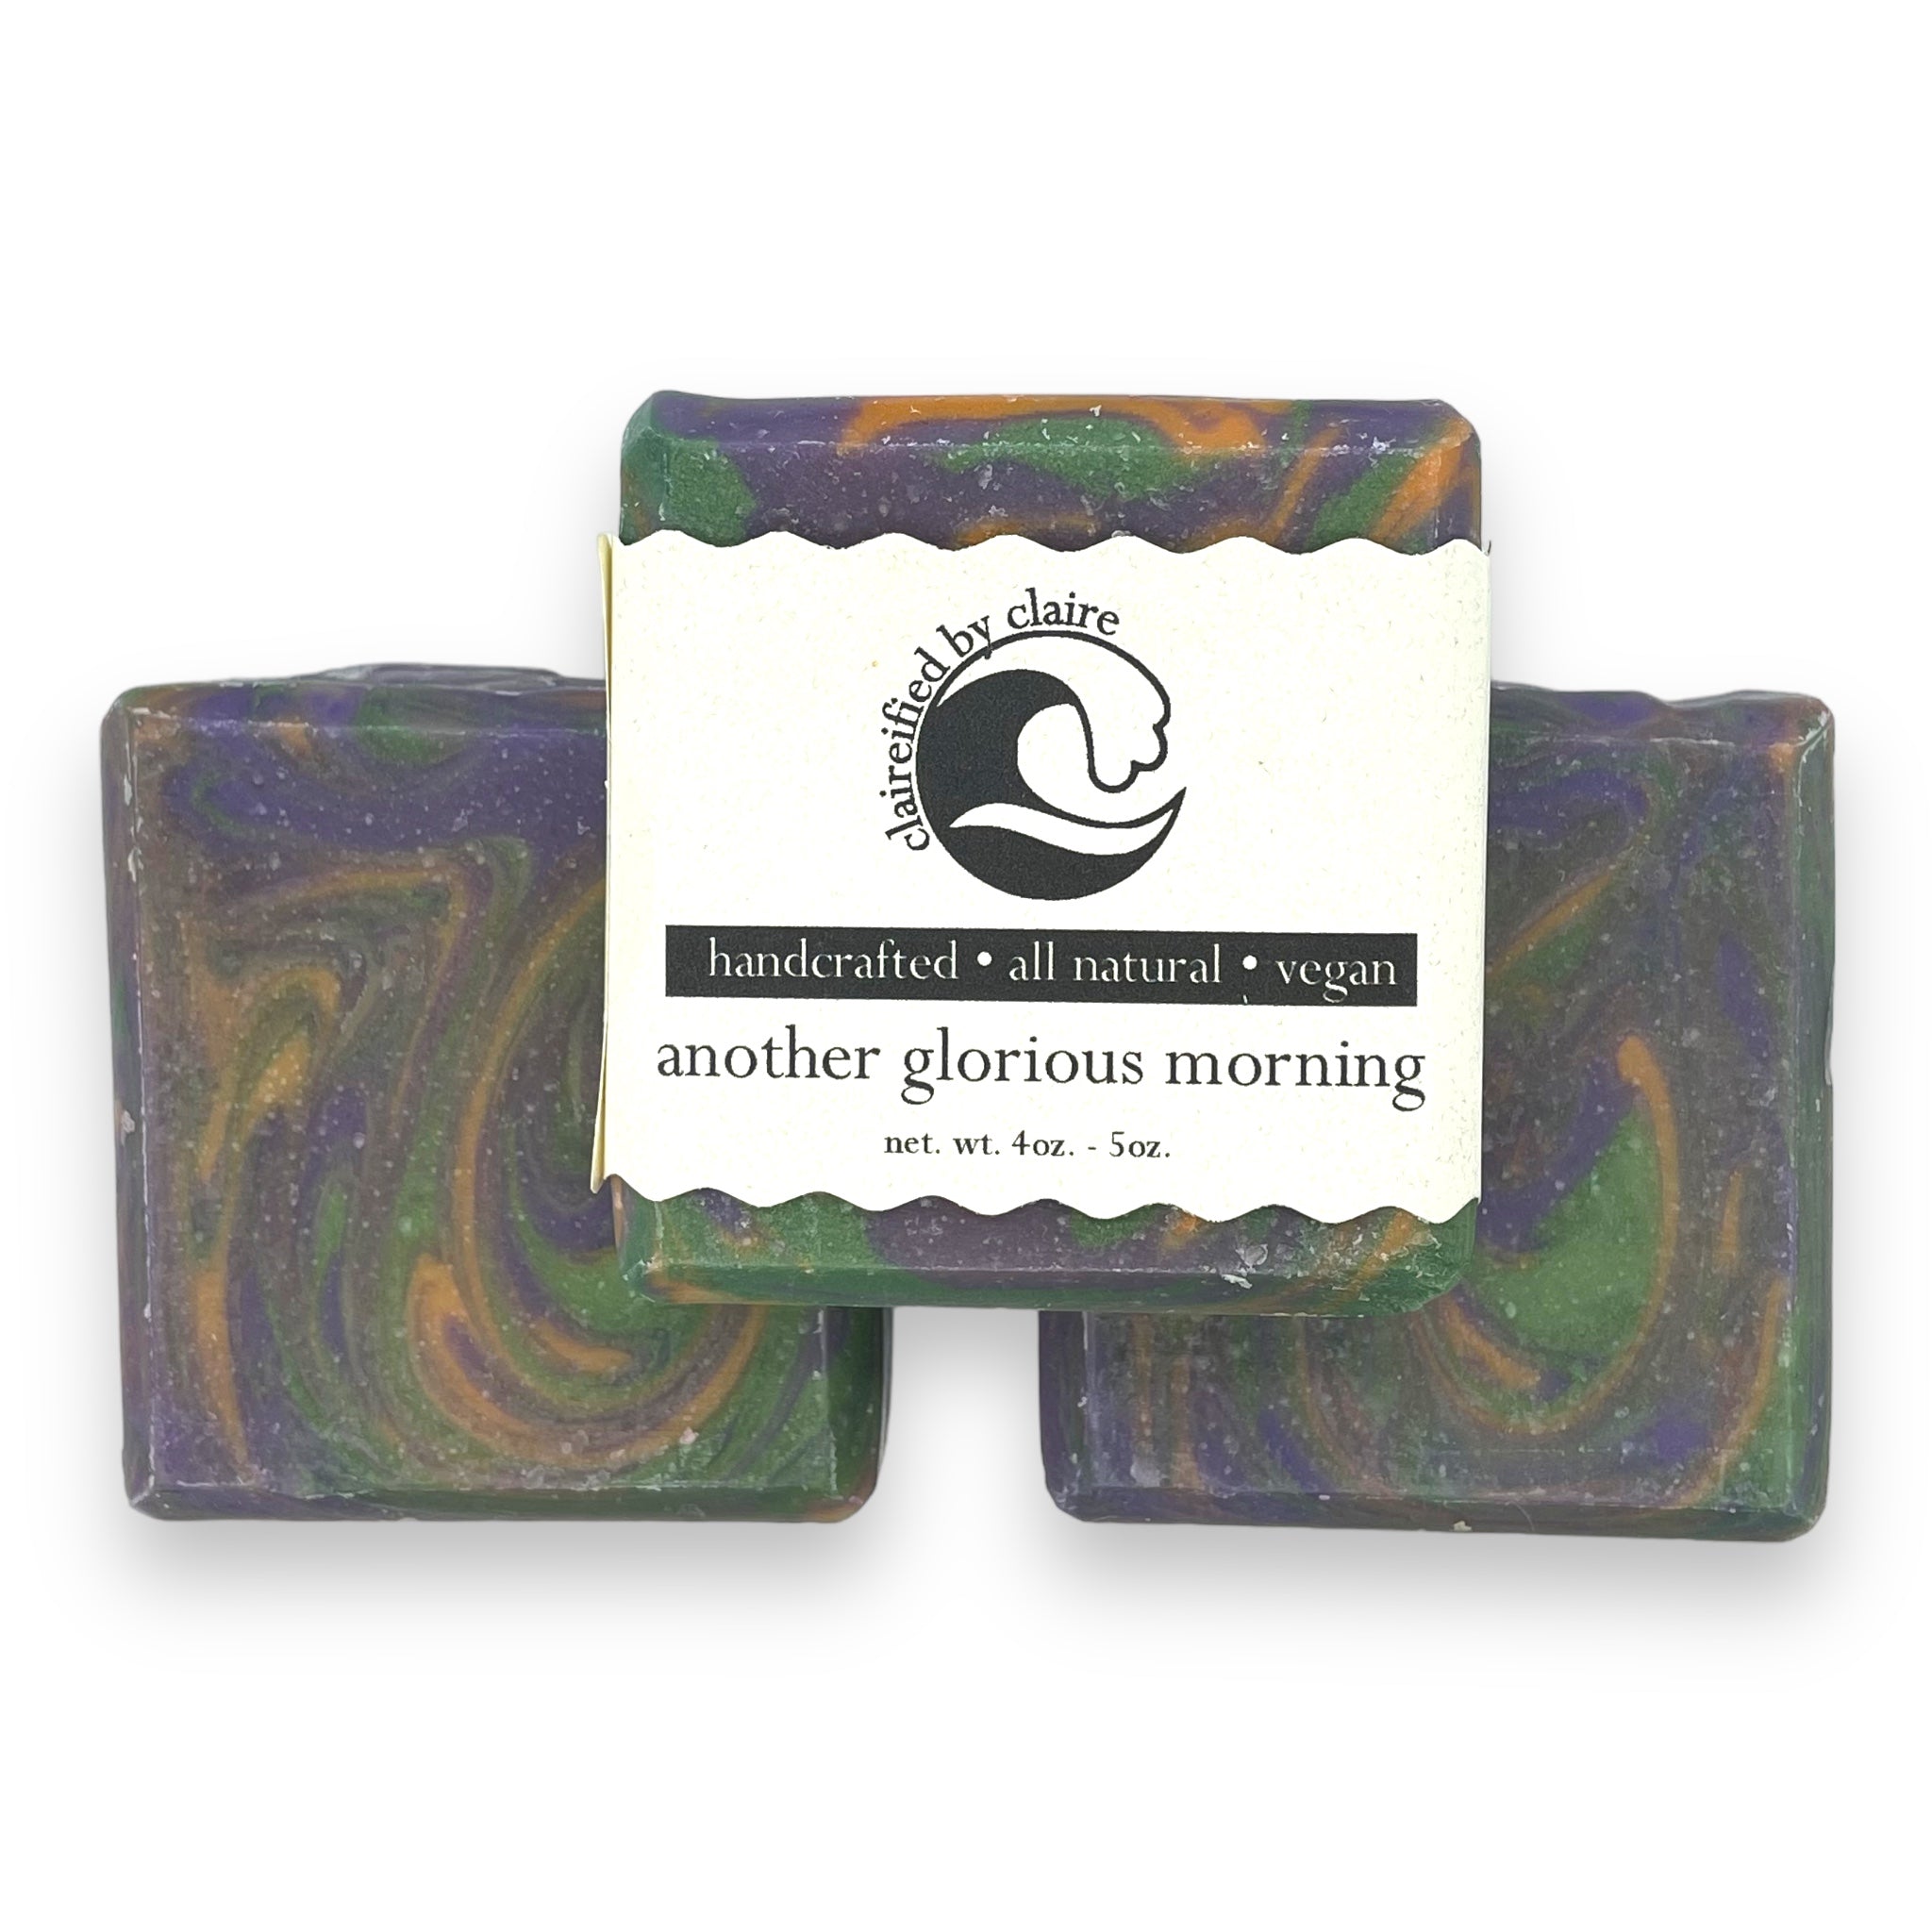 Another Glorius Morning handmade soap inspired by Winifred Sanderson of Hocus Pocus - 0